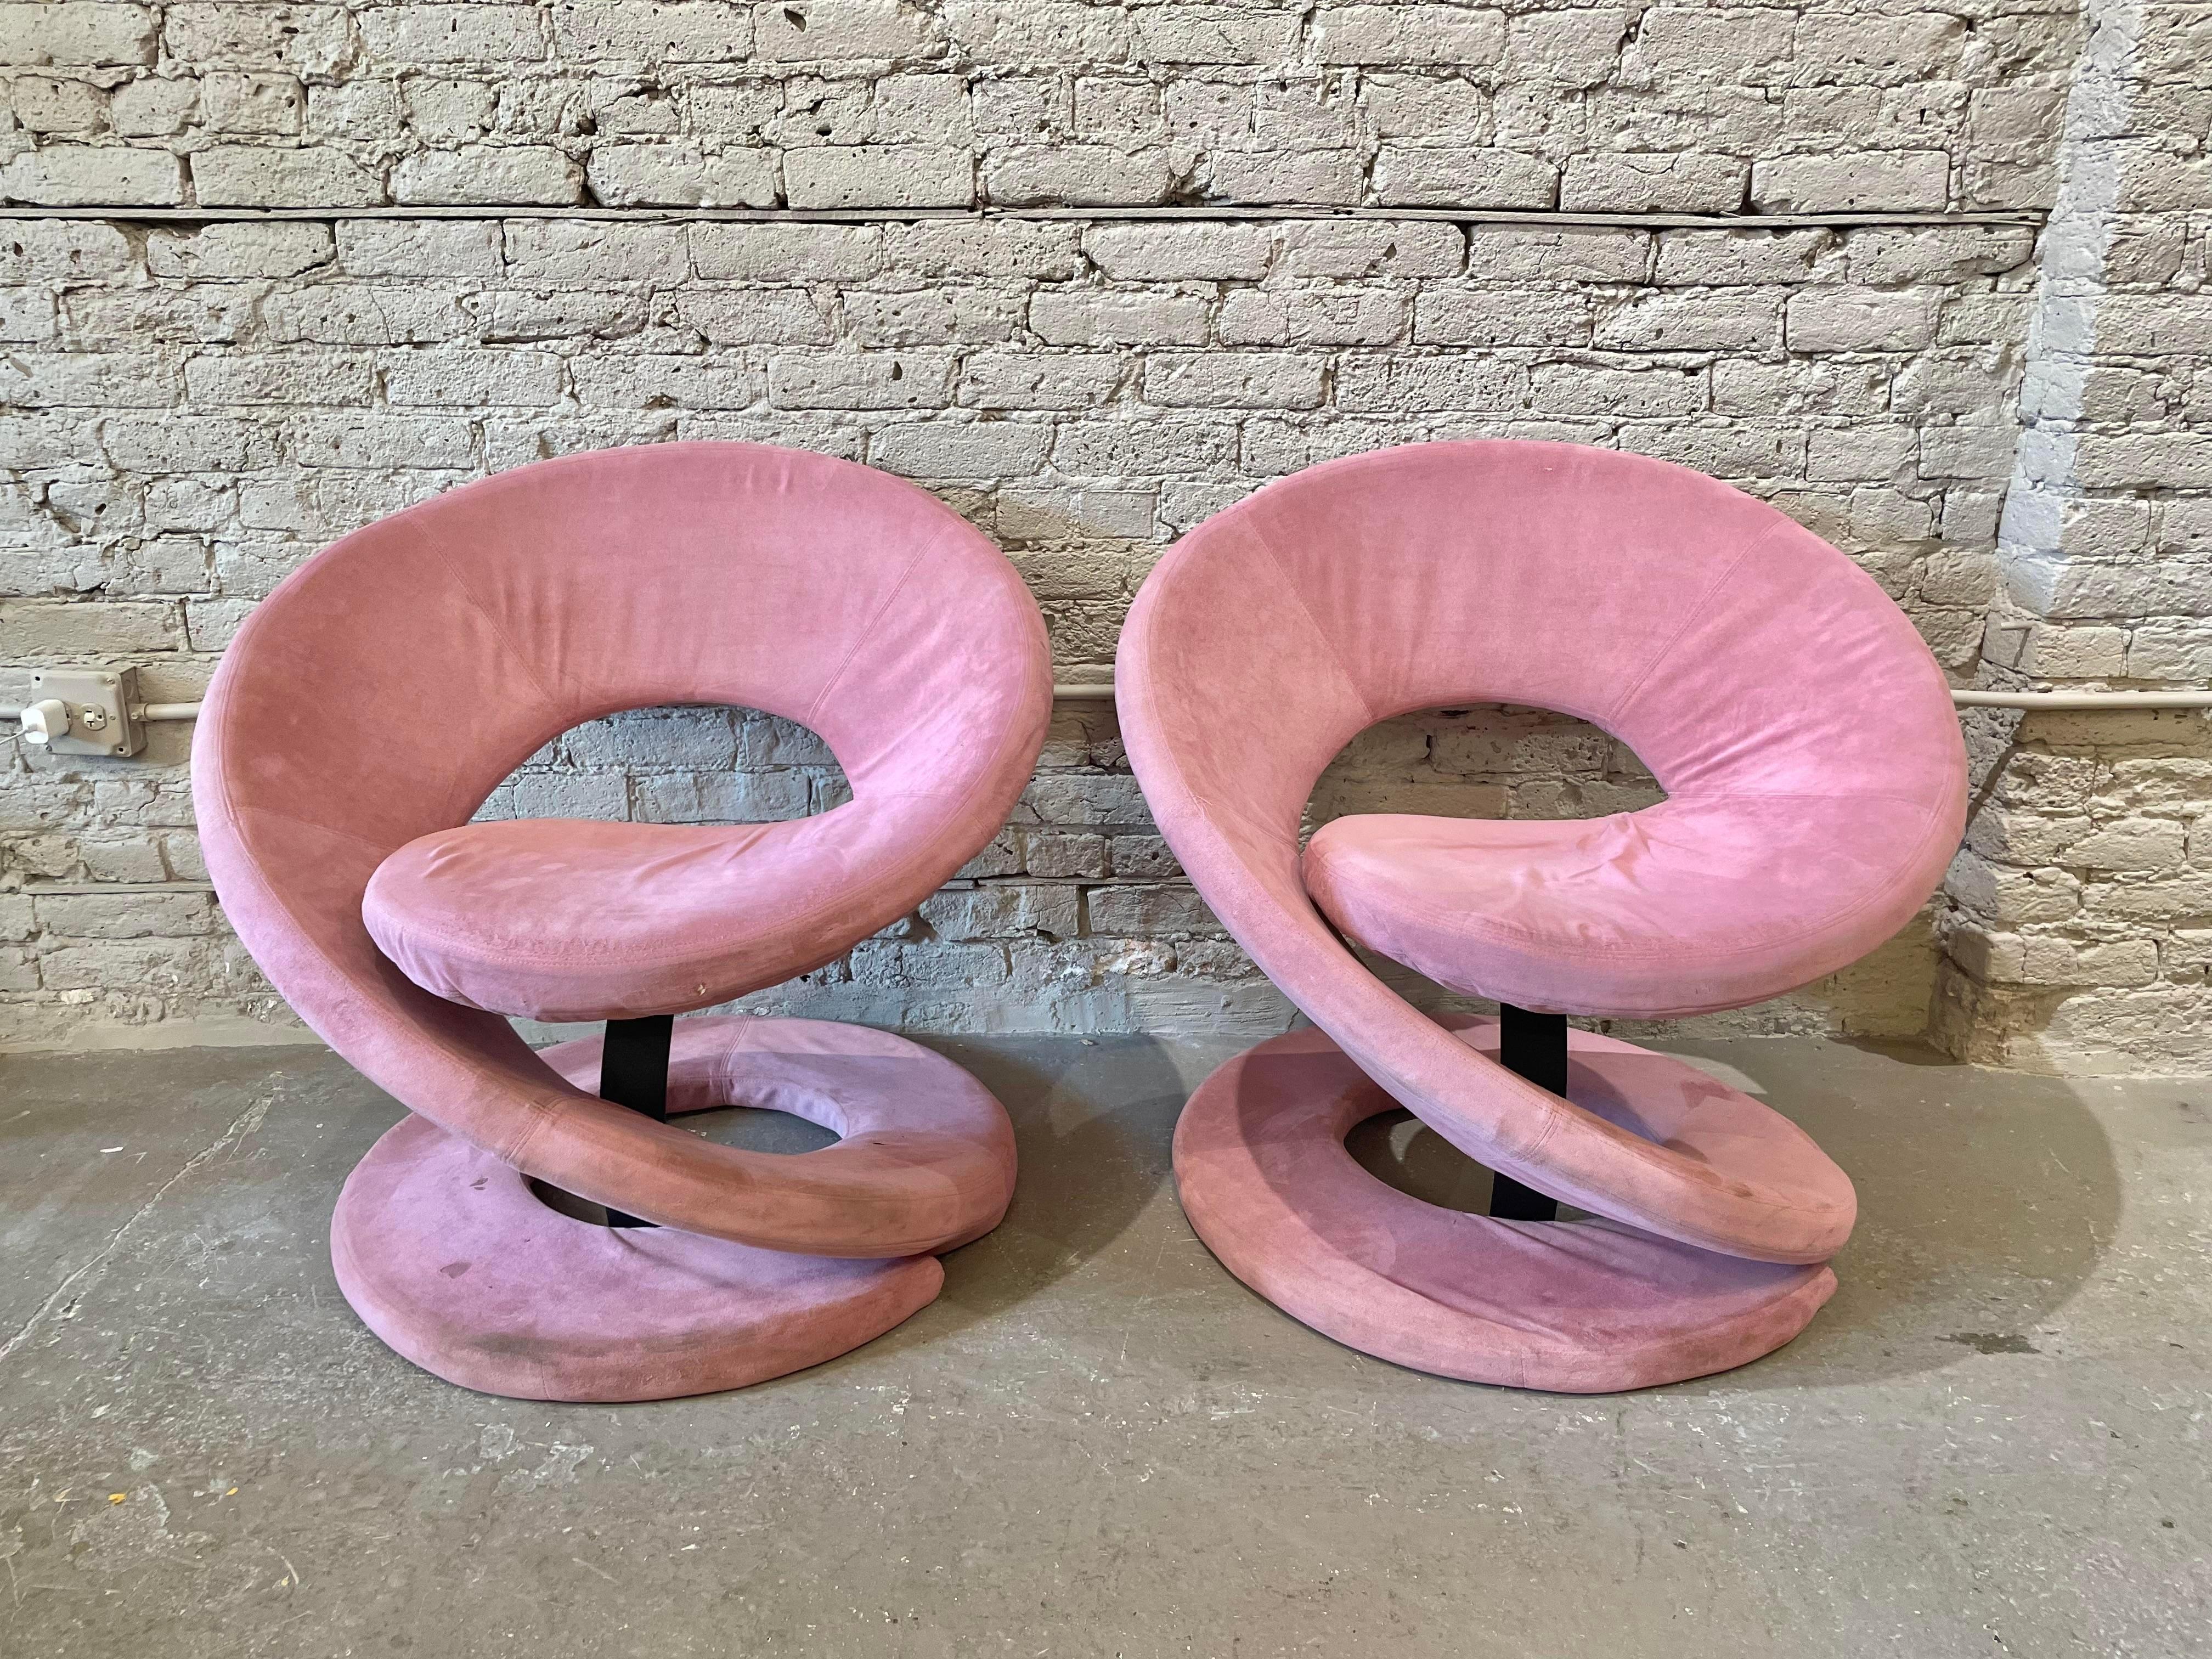 1980s Postmodern Corkscrew Chairs Attributed to Quebec 69 Jaymar - a Pair For Sale 2